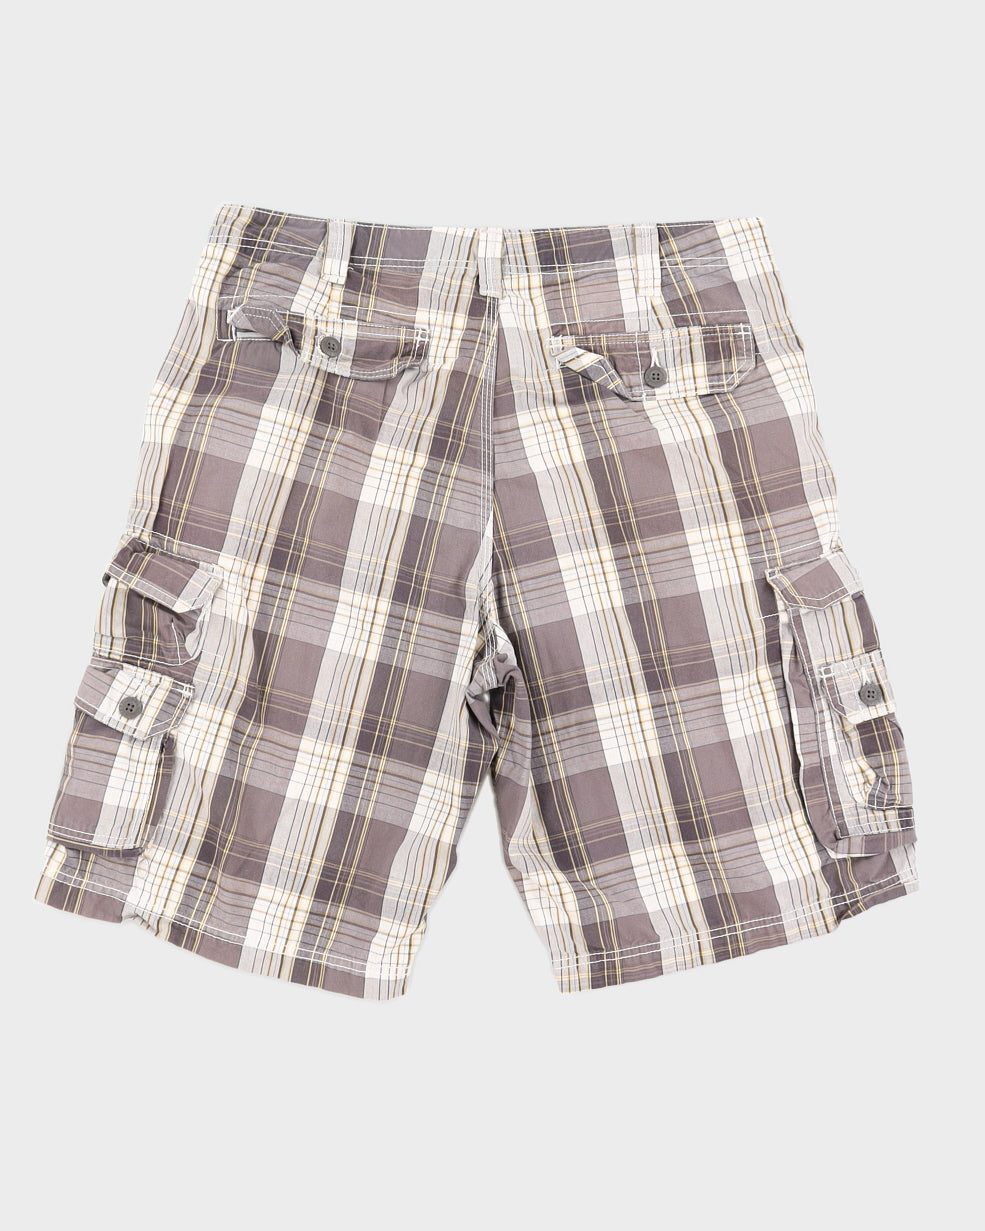 Lee Dungarees Grey Checked Cargo Shorts - W38